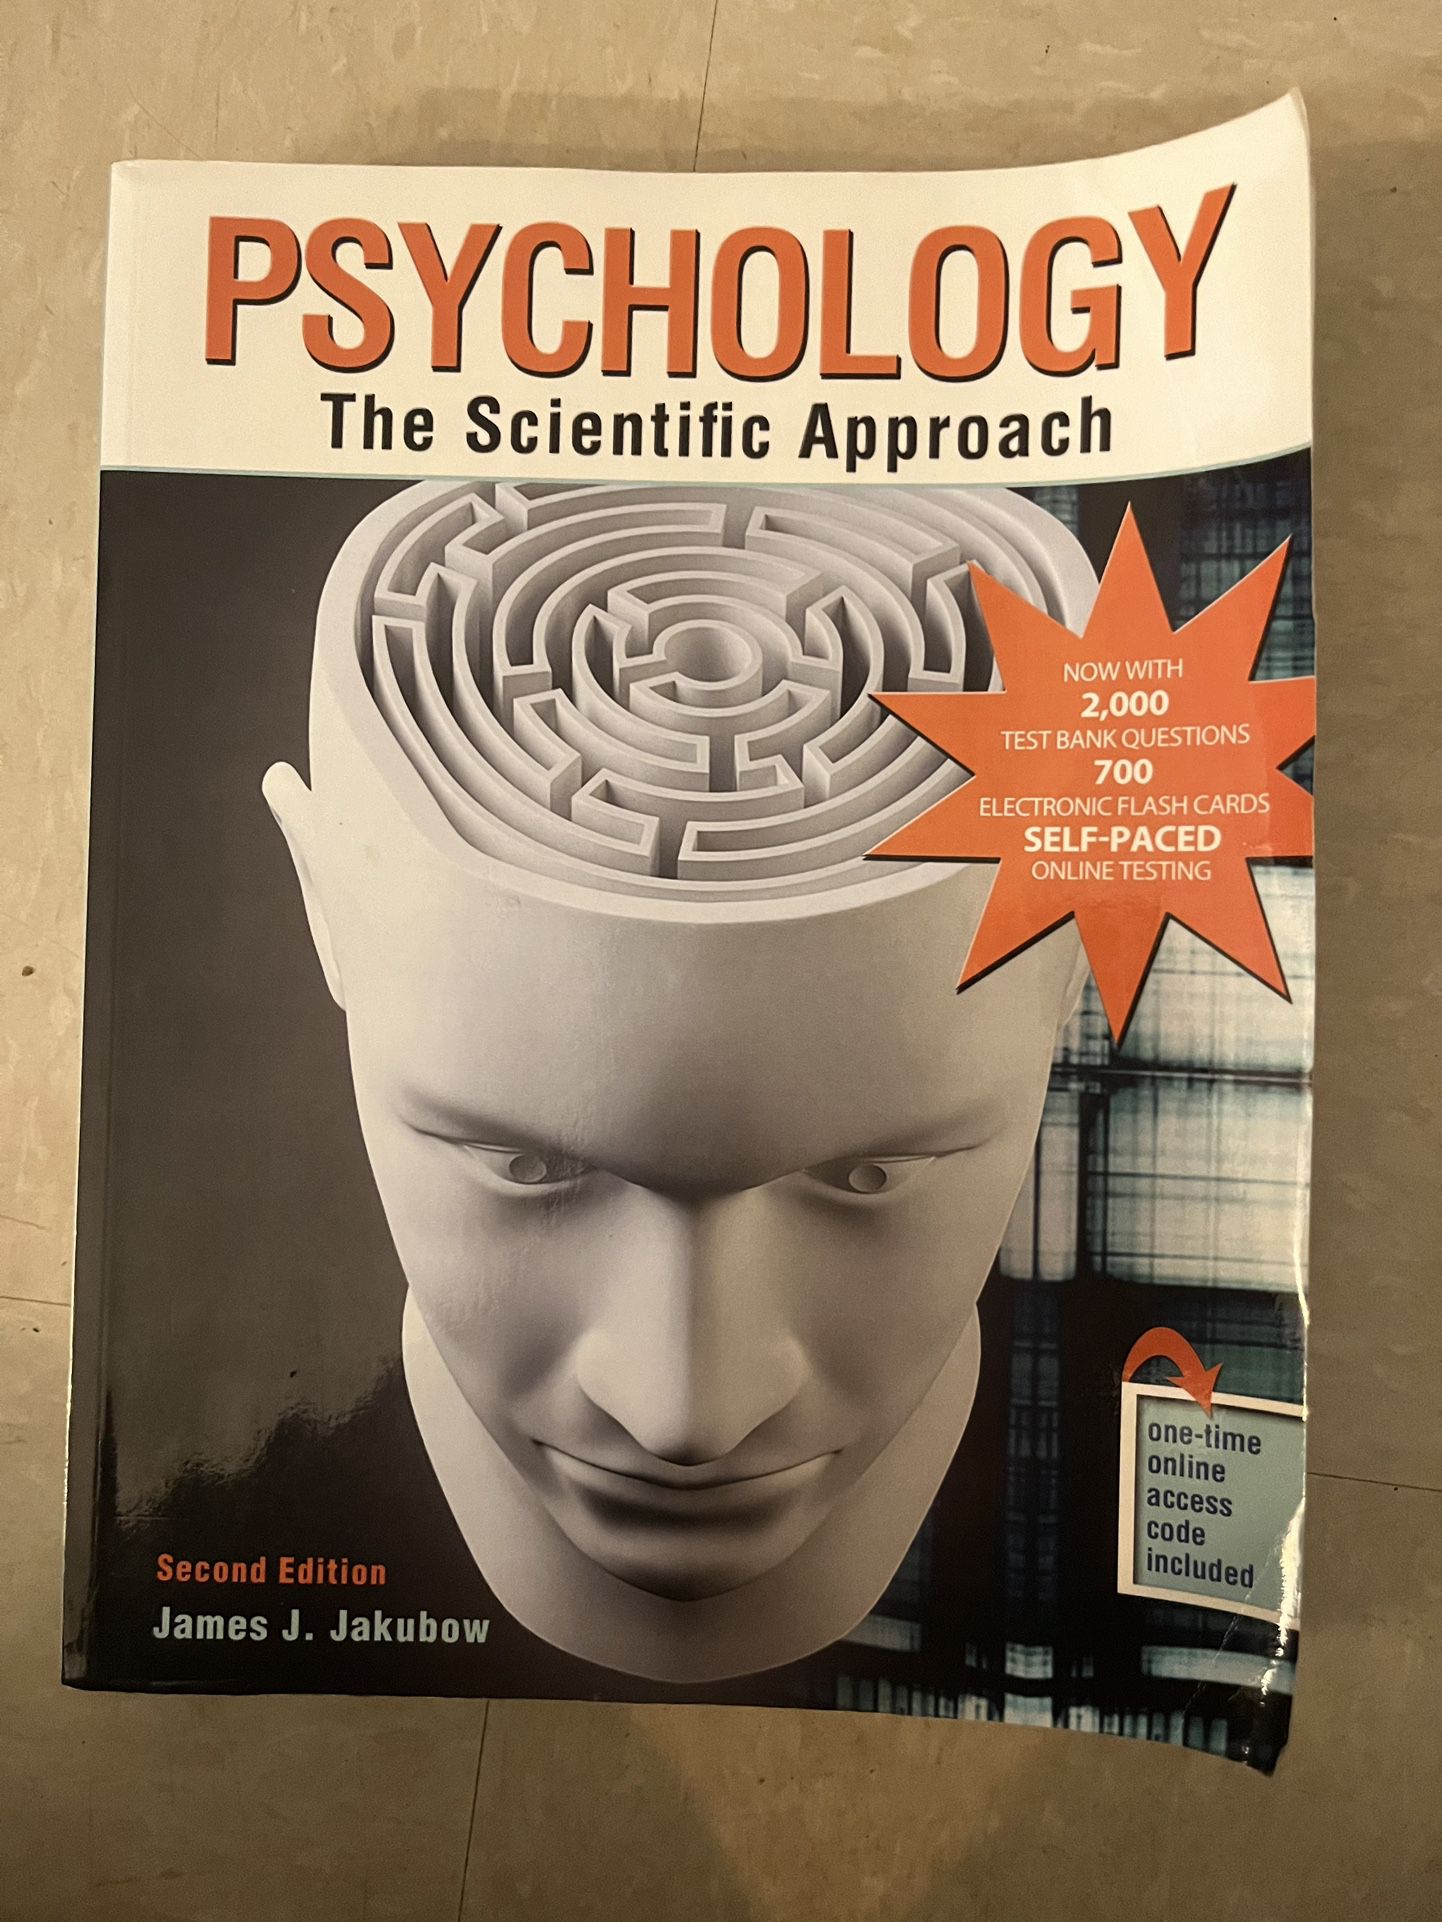 PSYCHOLOGY The Scientific Approach